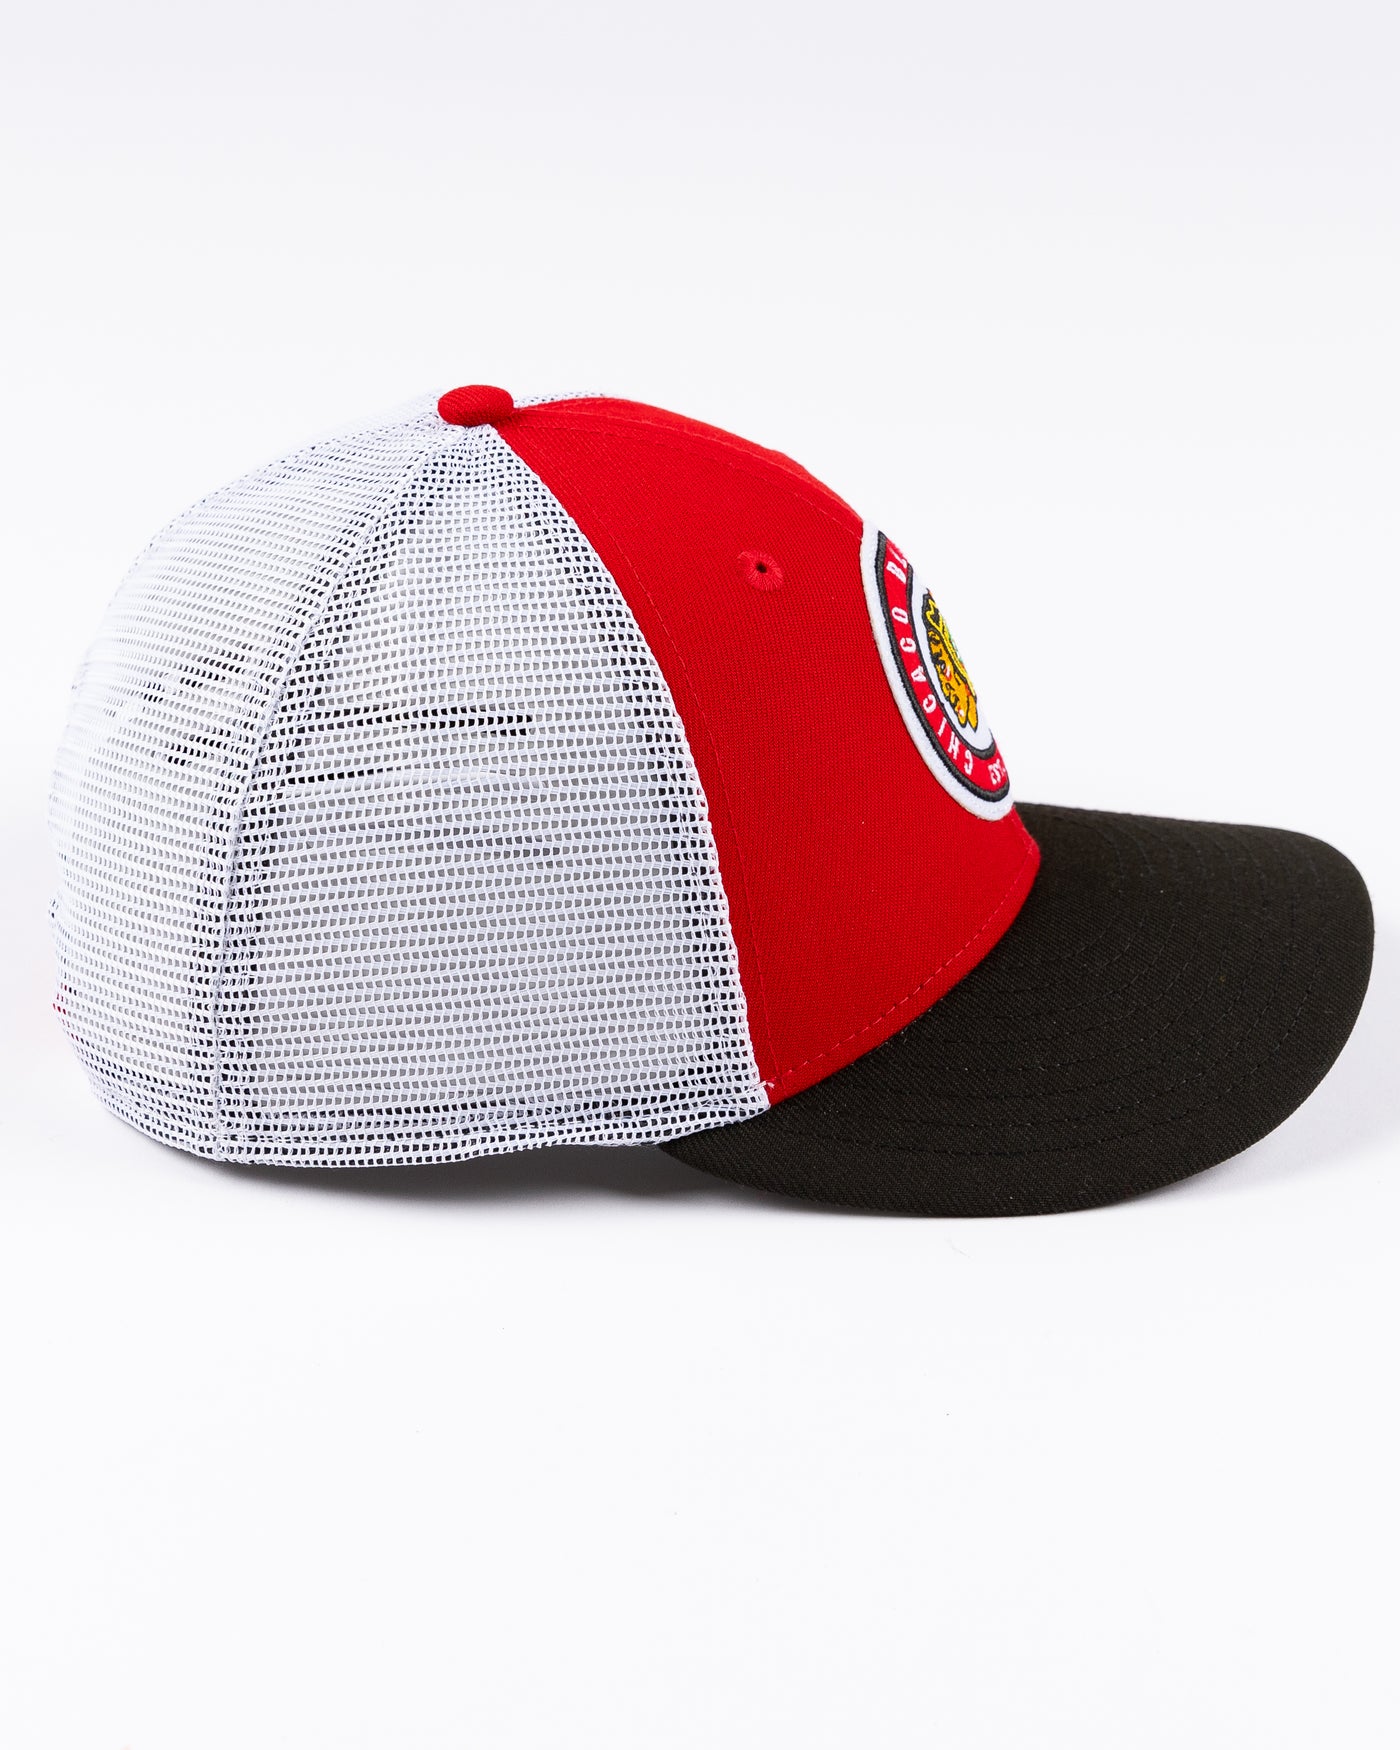 New Era 9FIFTY trucker snapback cap with Chicago Blackhawks throwback logo embroidered on front - right side lay flat